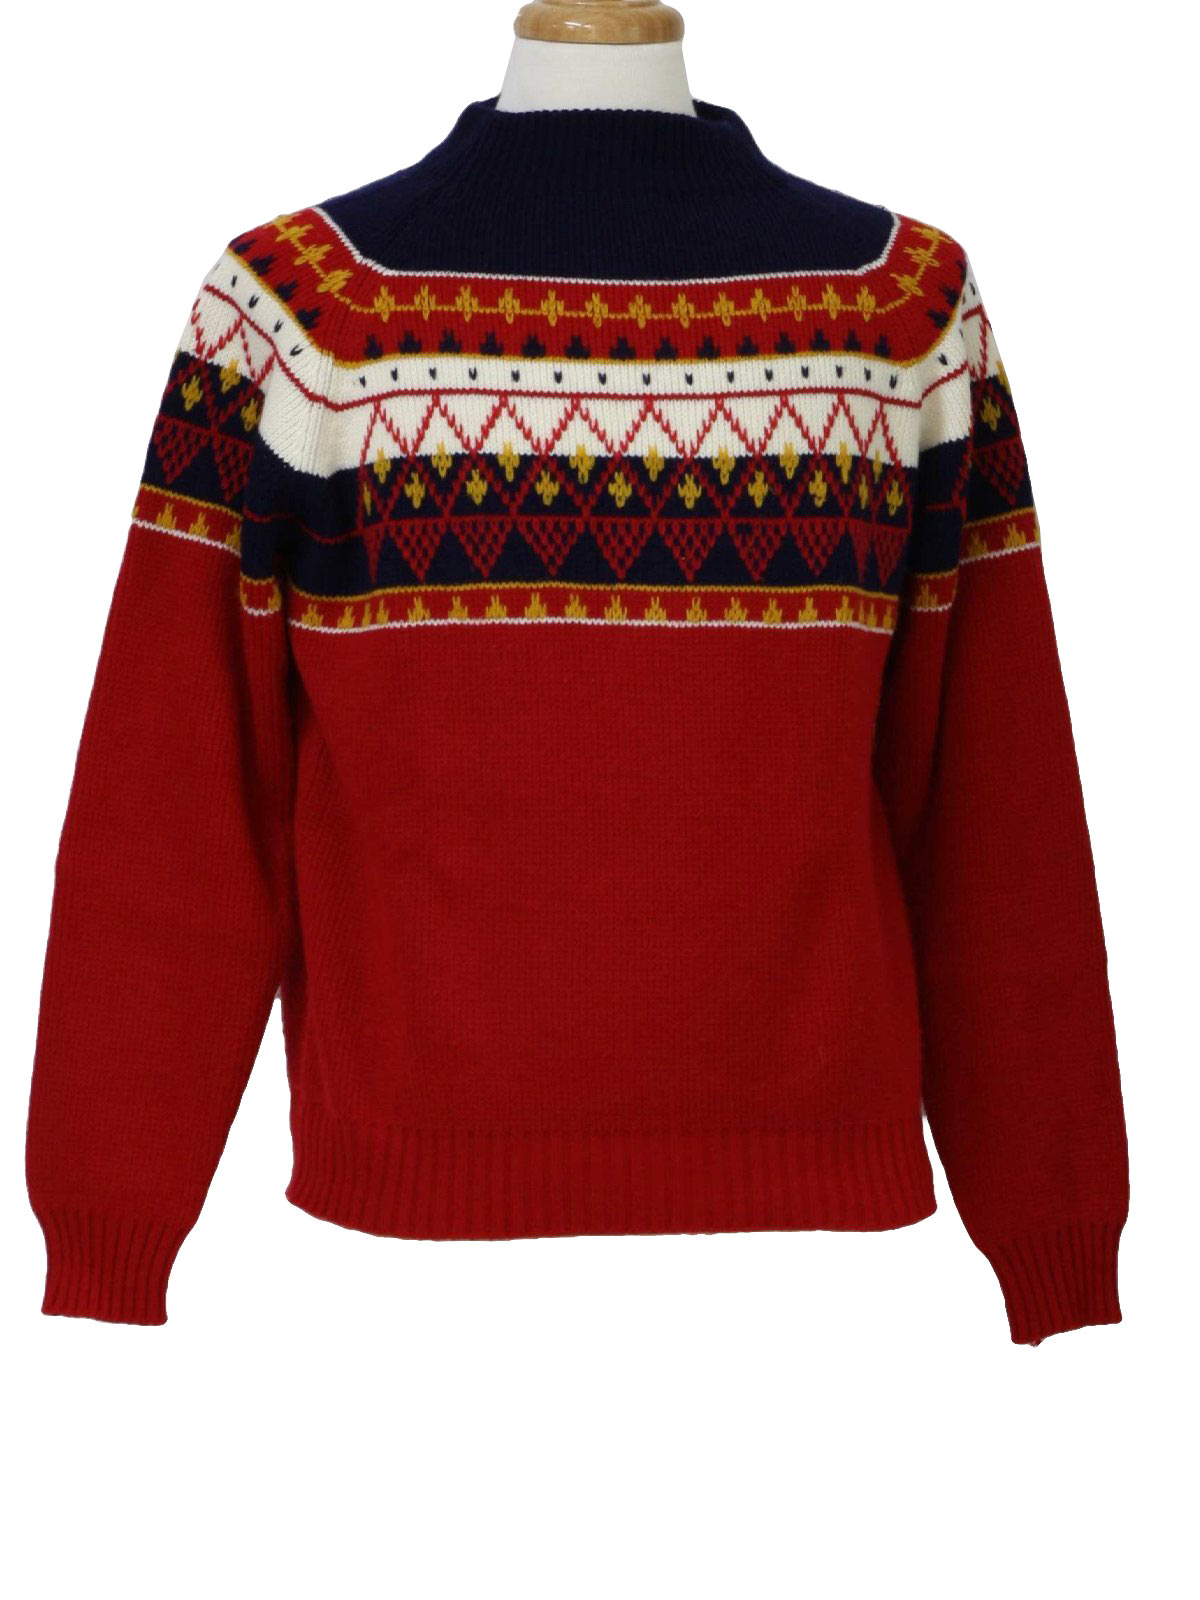 1970's Retro Sweater: 70s -JC Penney- Mens red, navy and white ...